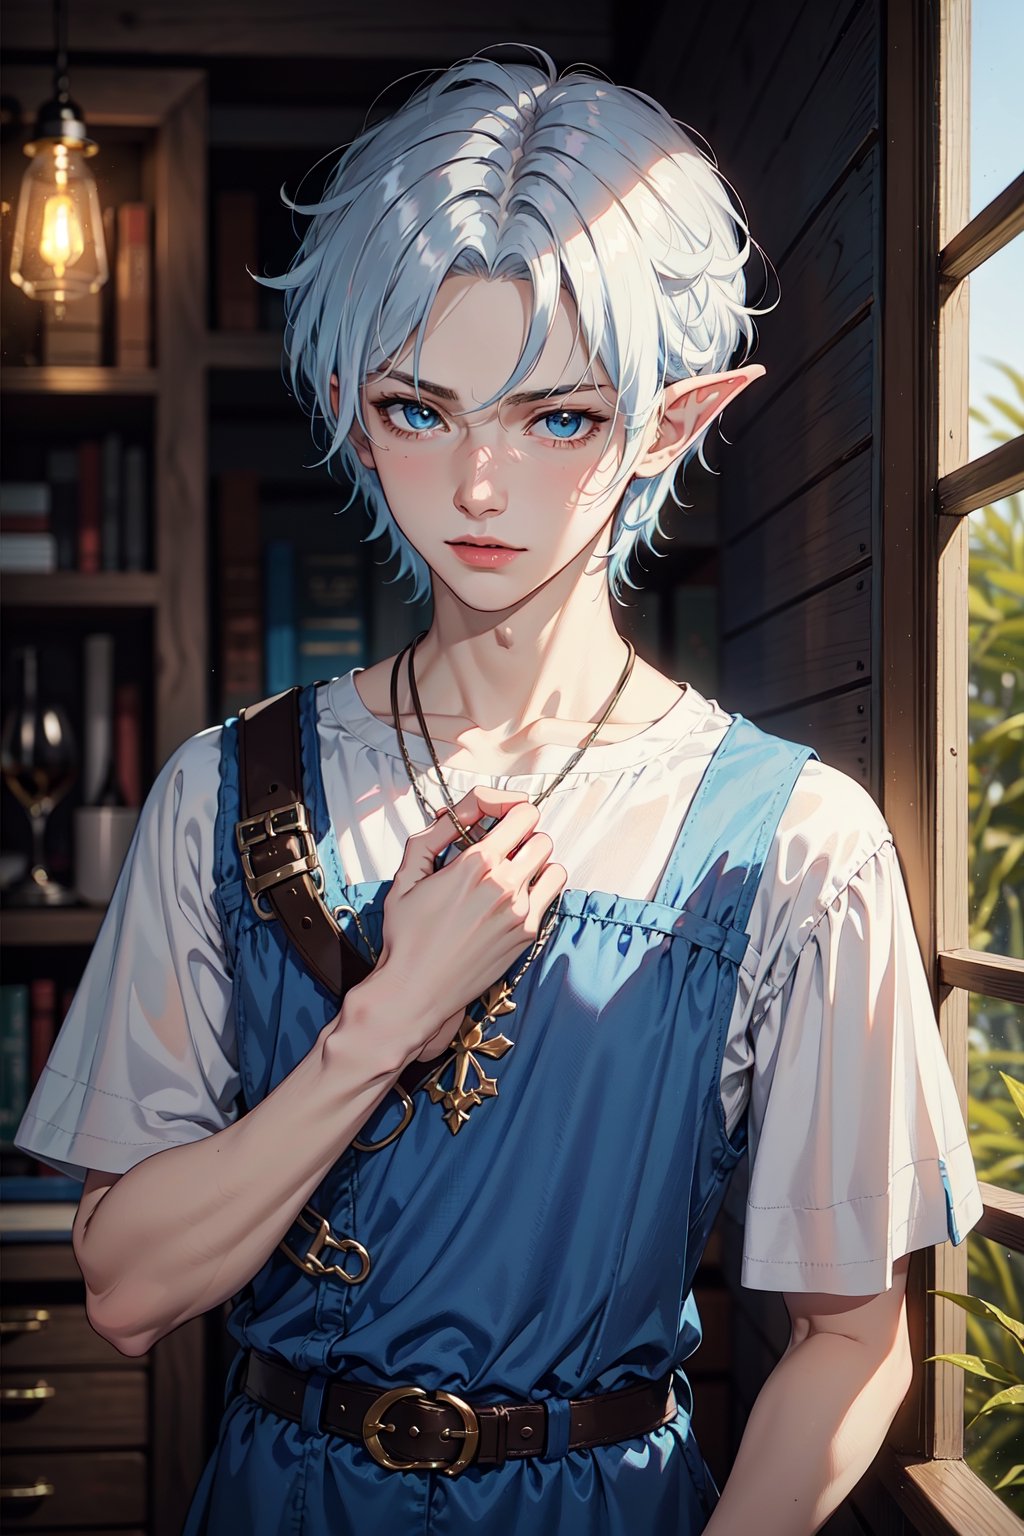 human_prince_with_brown_hair_white_tunic and fairy_elf_princess_with_blue_white_hair_wearing_lightblue_pixie_dress